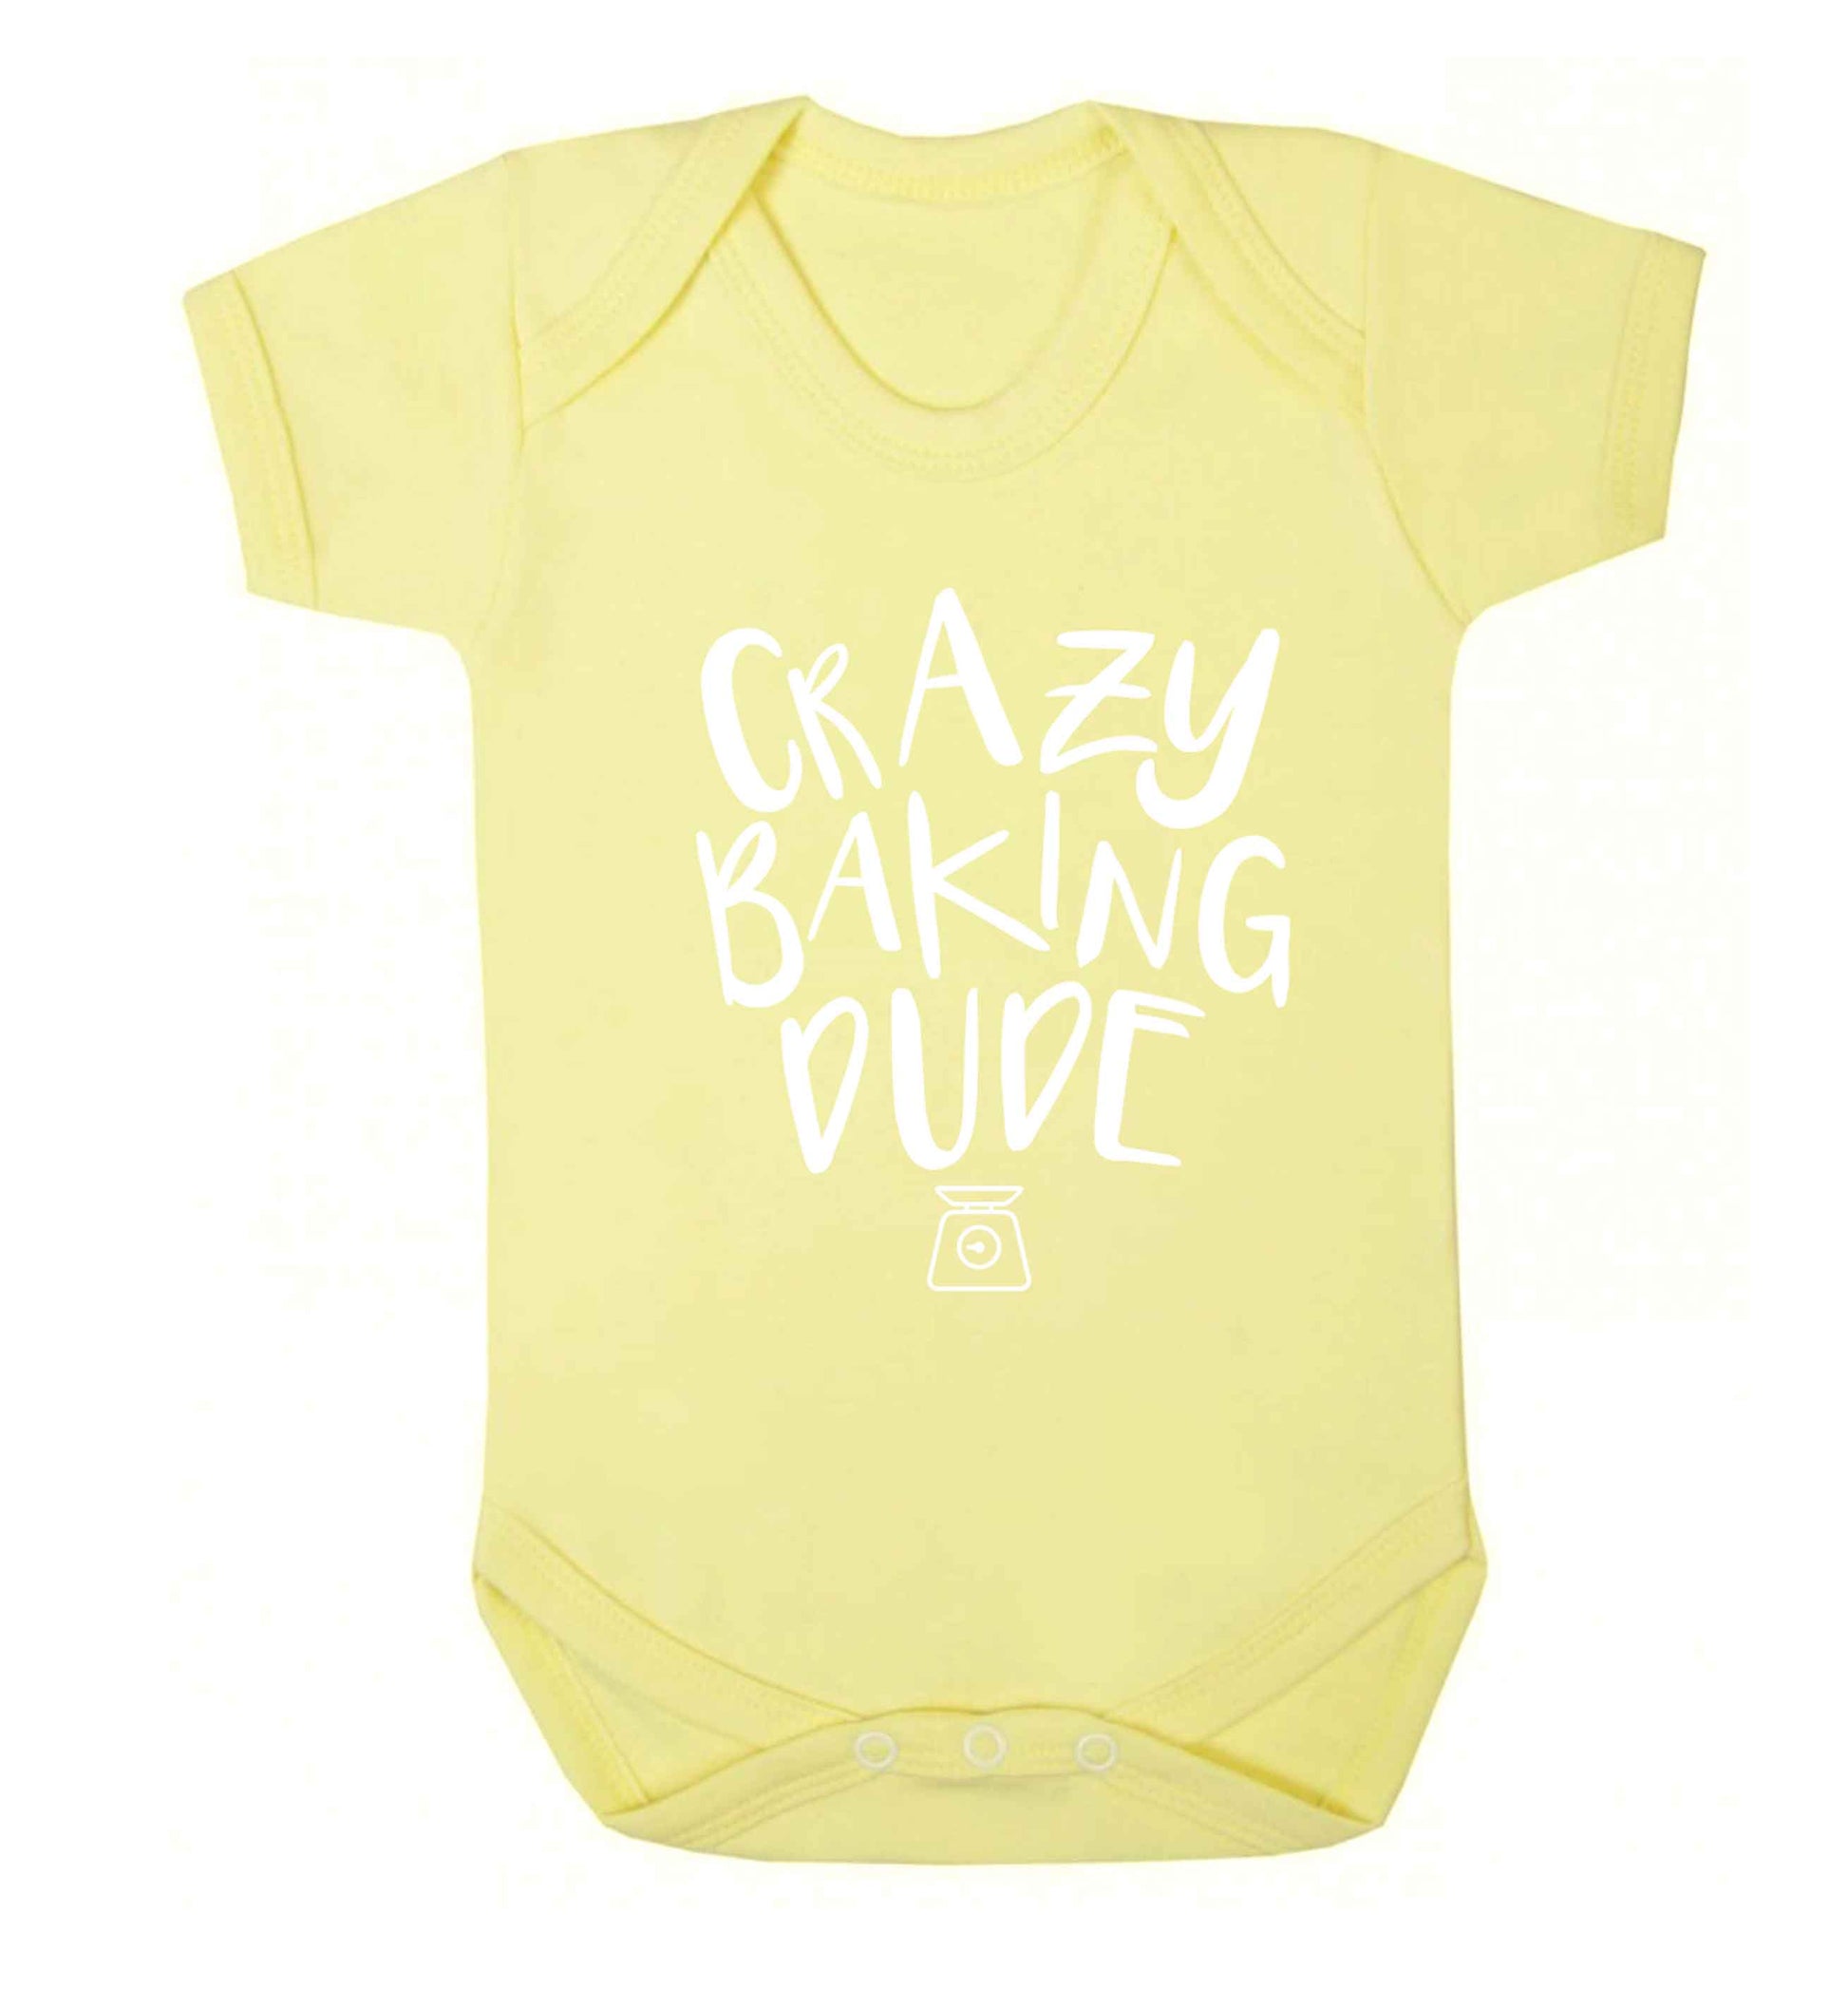 Crazy baking dude Baby Vest pale yellow 18-24 months